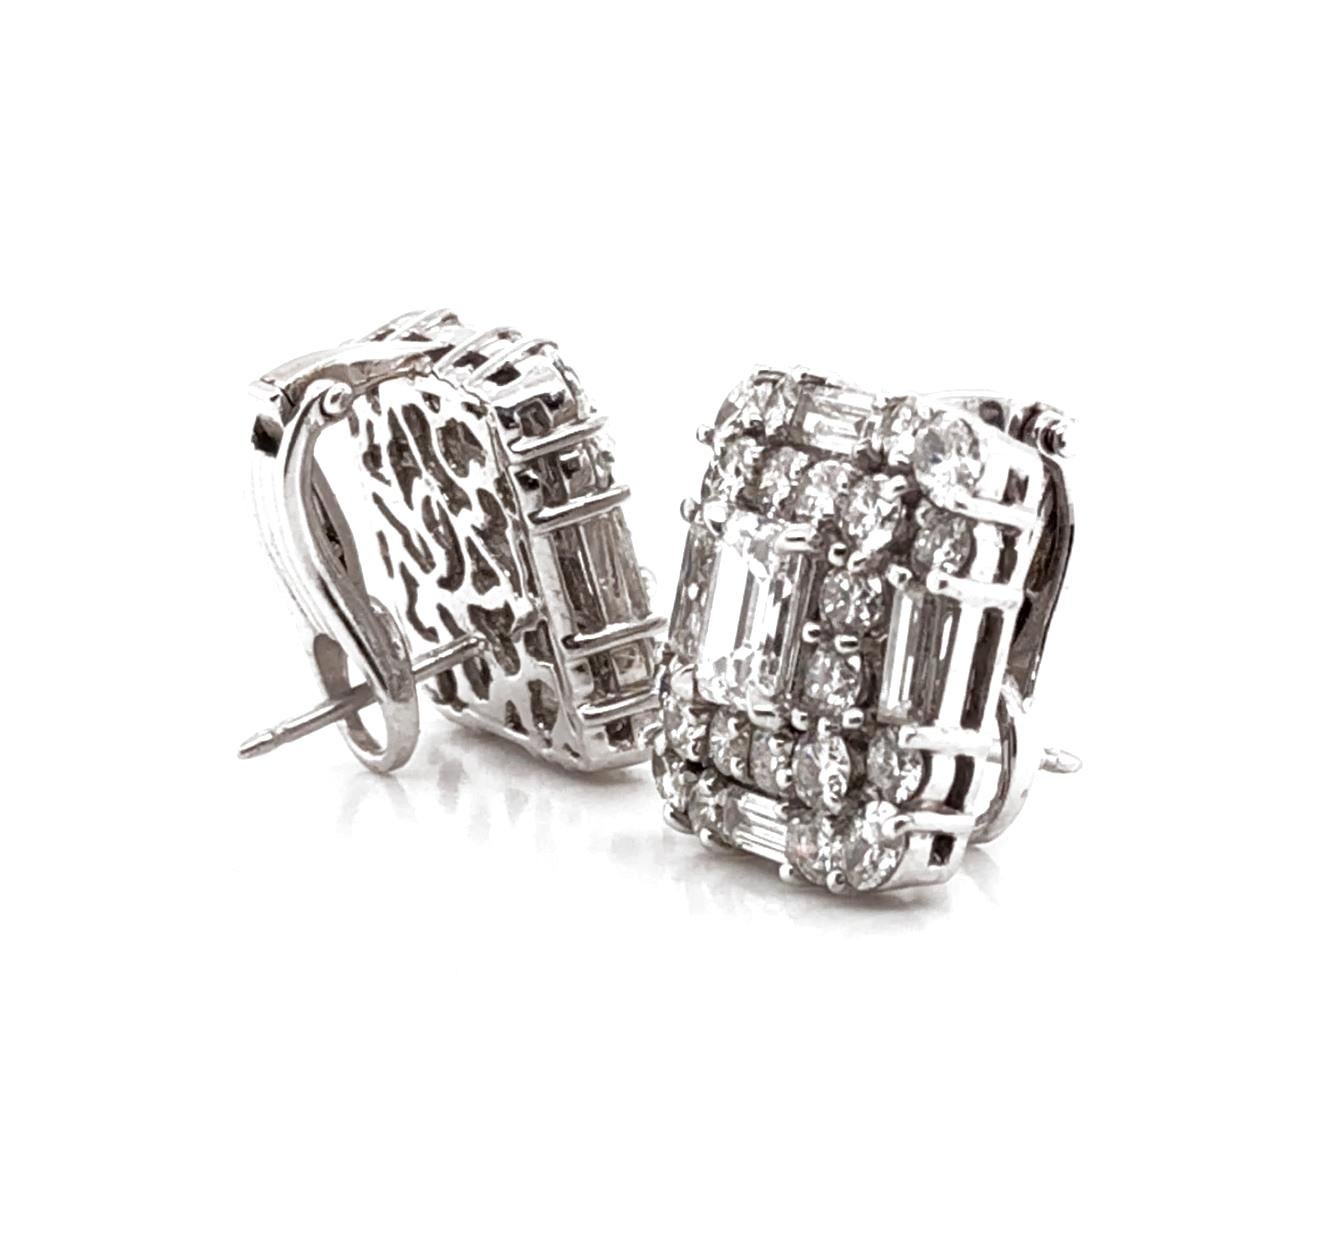 GIA Certified Emerald Cut Diamonds 2.02 ct  Platinum Diamond Earrings In New Condition For Sale In New York, NY